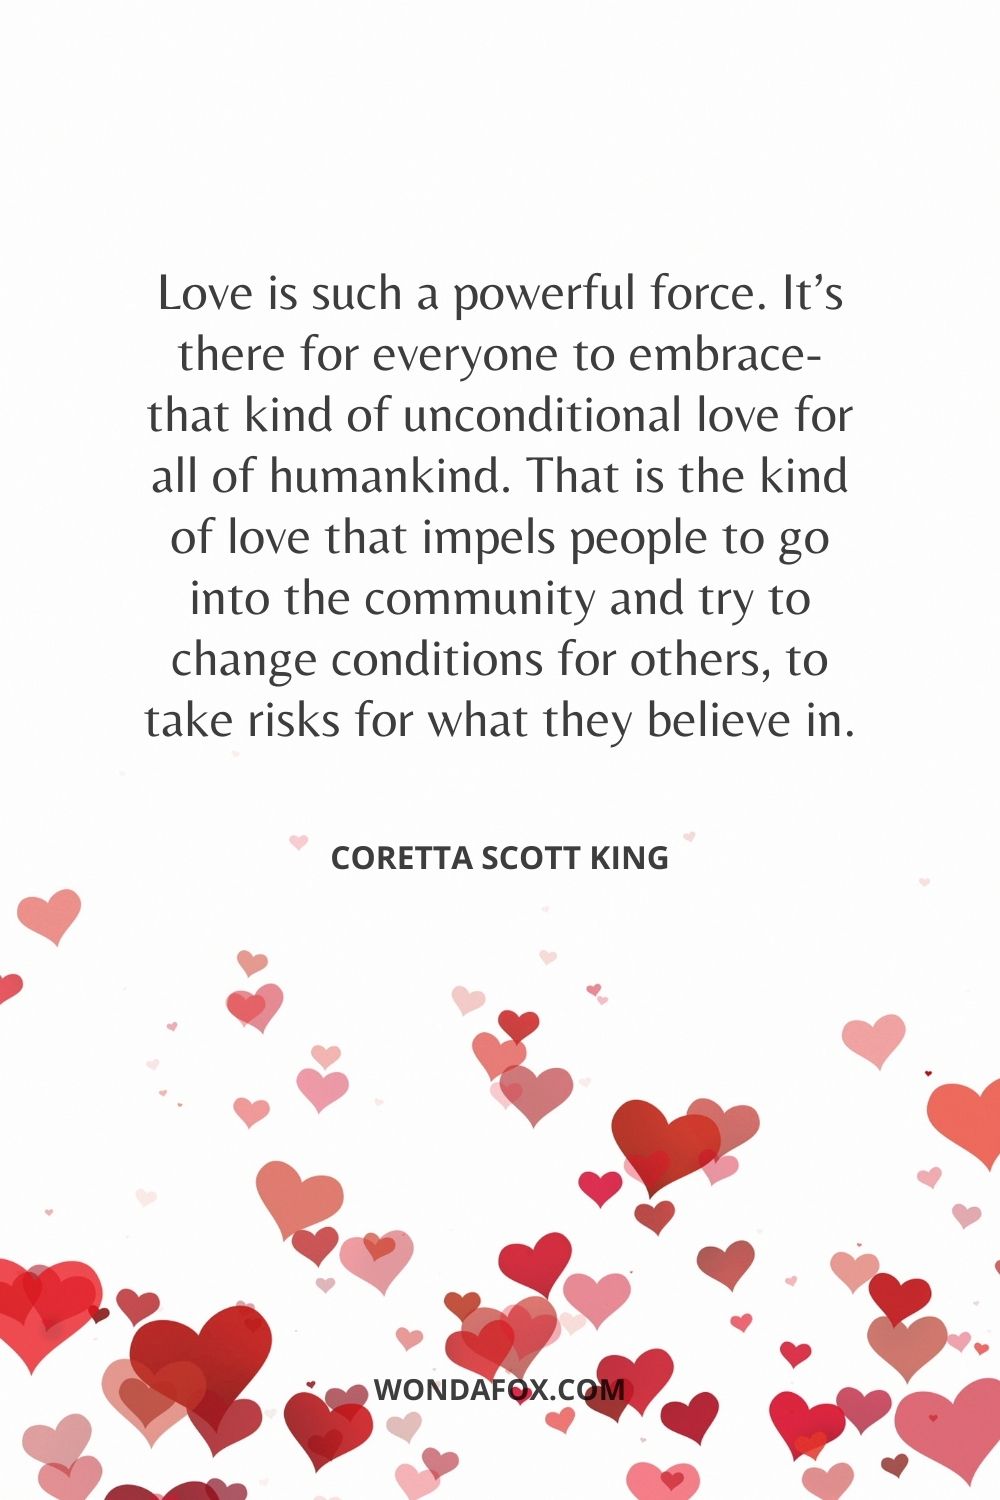 Love is such a powerful force. It’s there for everyone to embrace-that kind of unconditional love for all of humankind. That is the kind of love that impels people to go into the community and try to change conditions for others, to take risks for what they believe in.